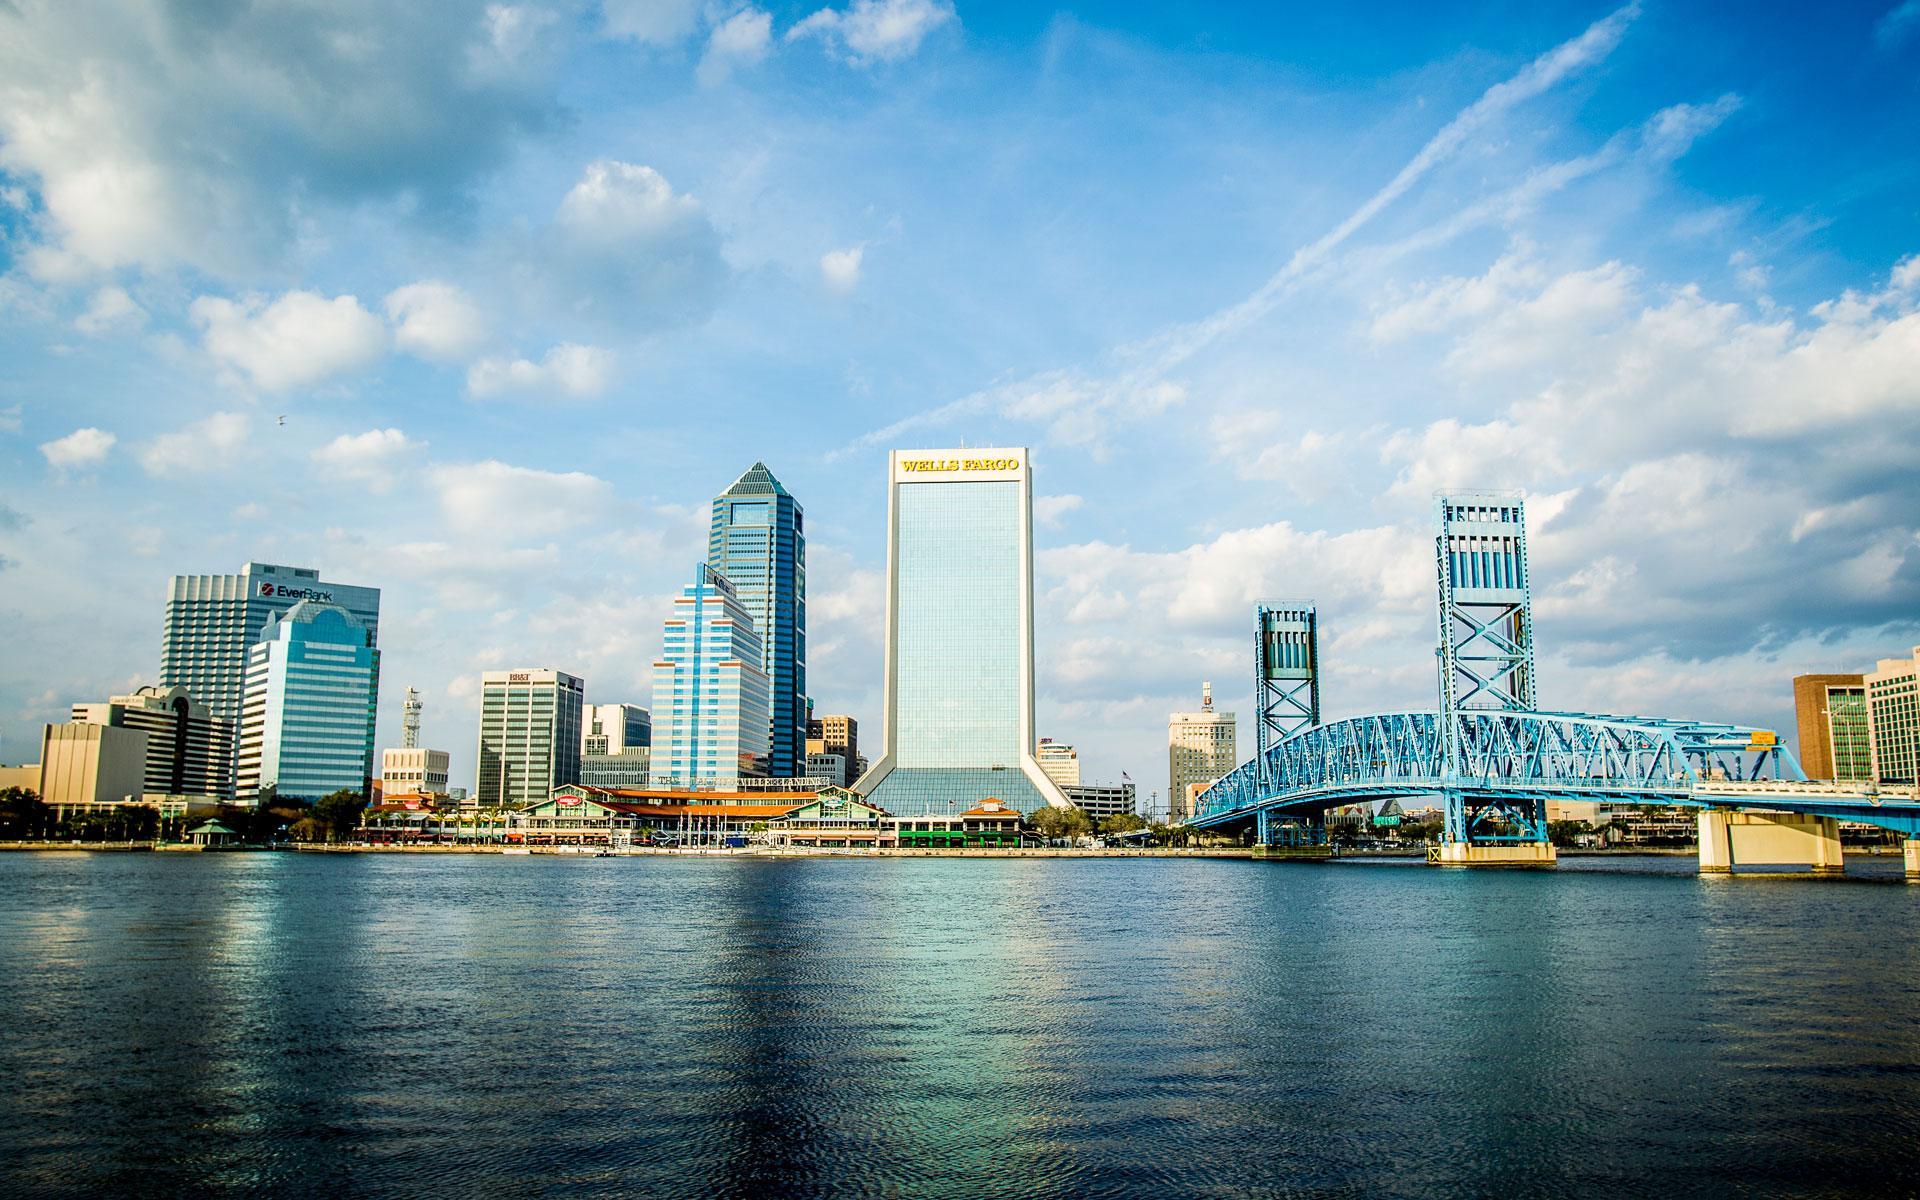 Jacksonville is a large city in northeastern Florida